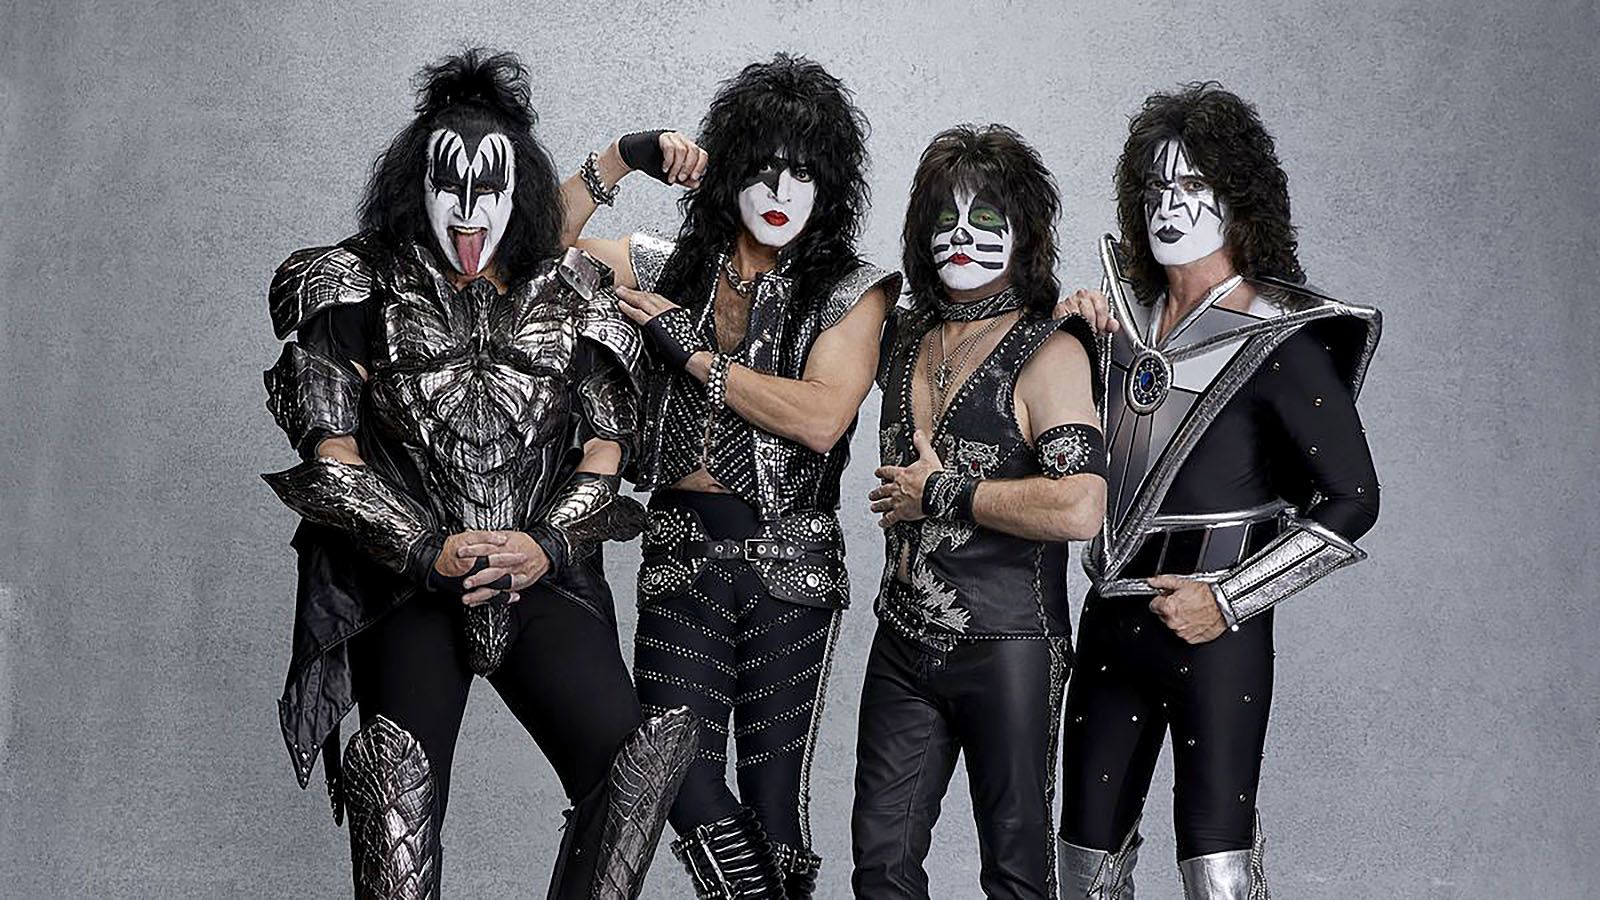 Kiss say their final concert will be at Madison Square Garden in New York.